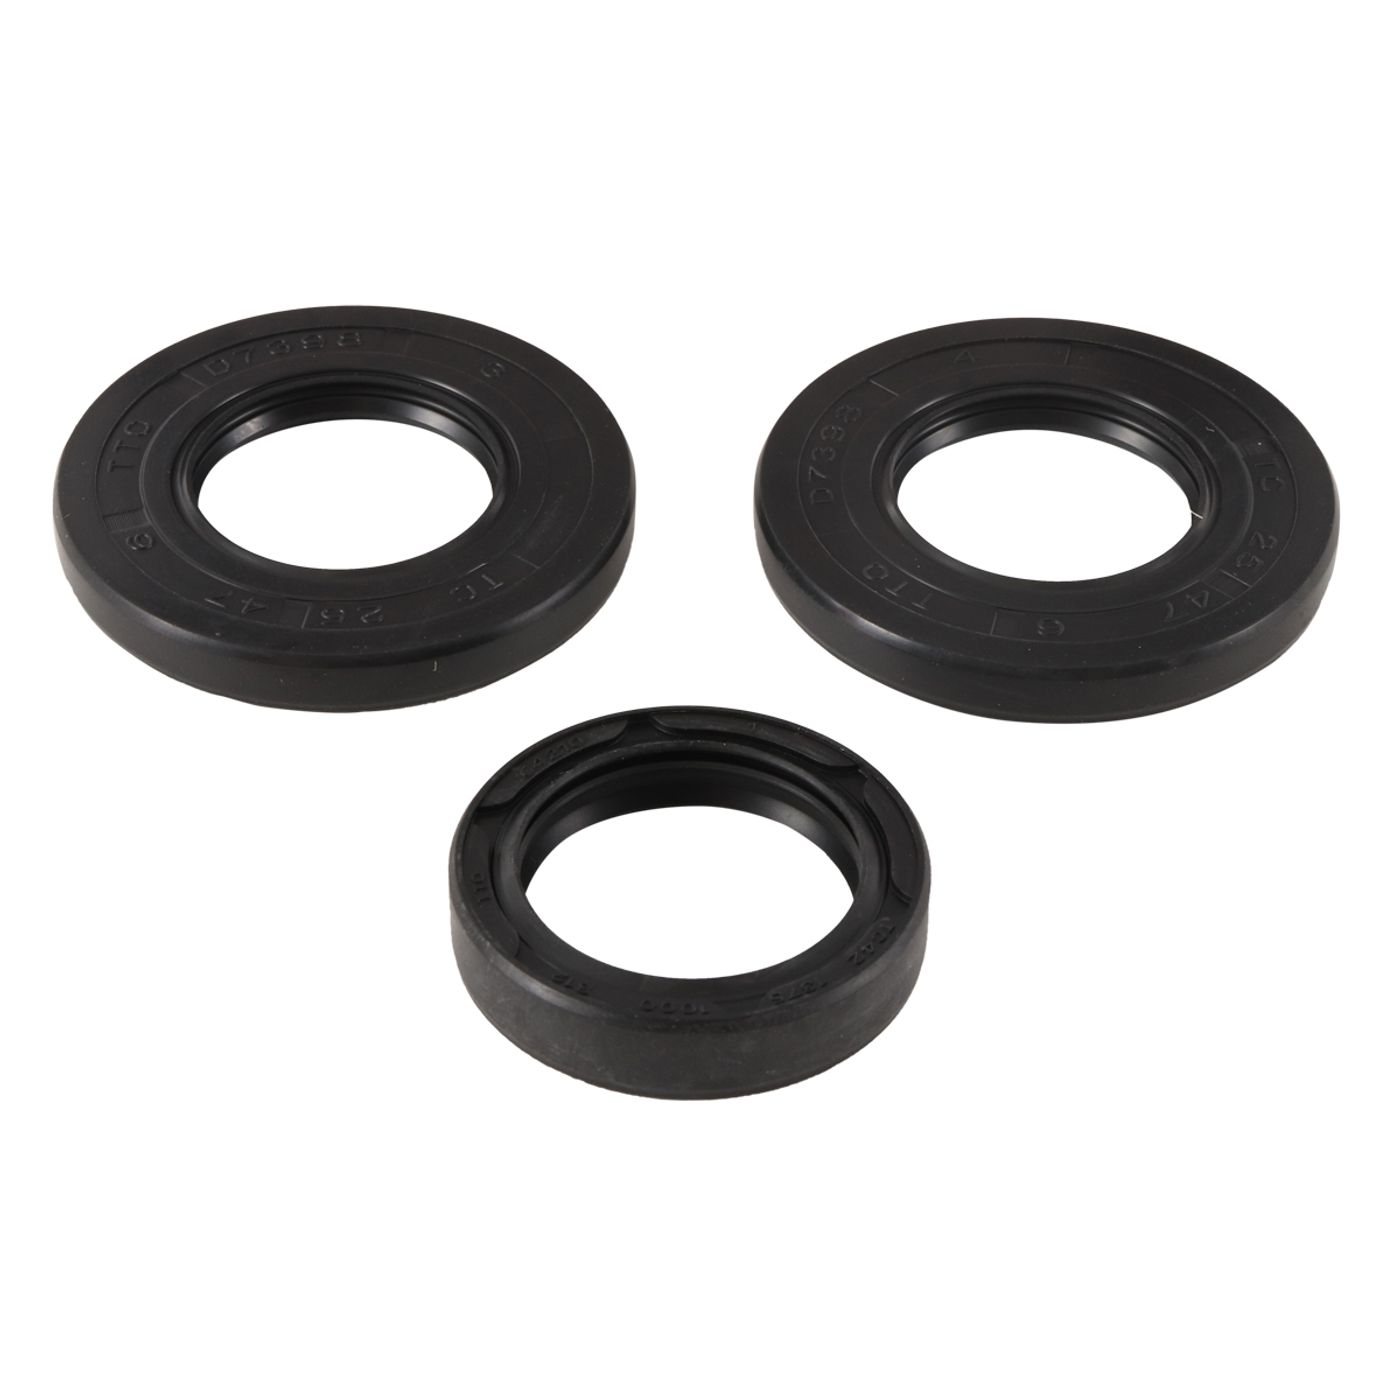 Wrp Diff Seal Kits - WRP252054-5 image